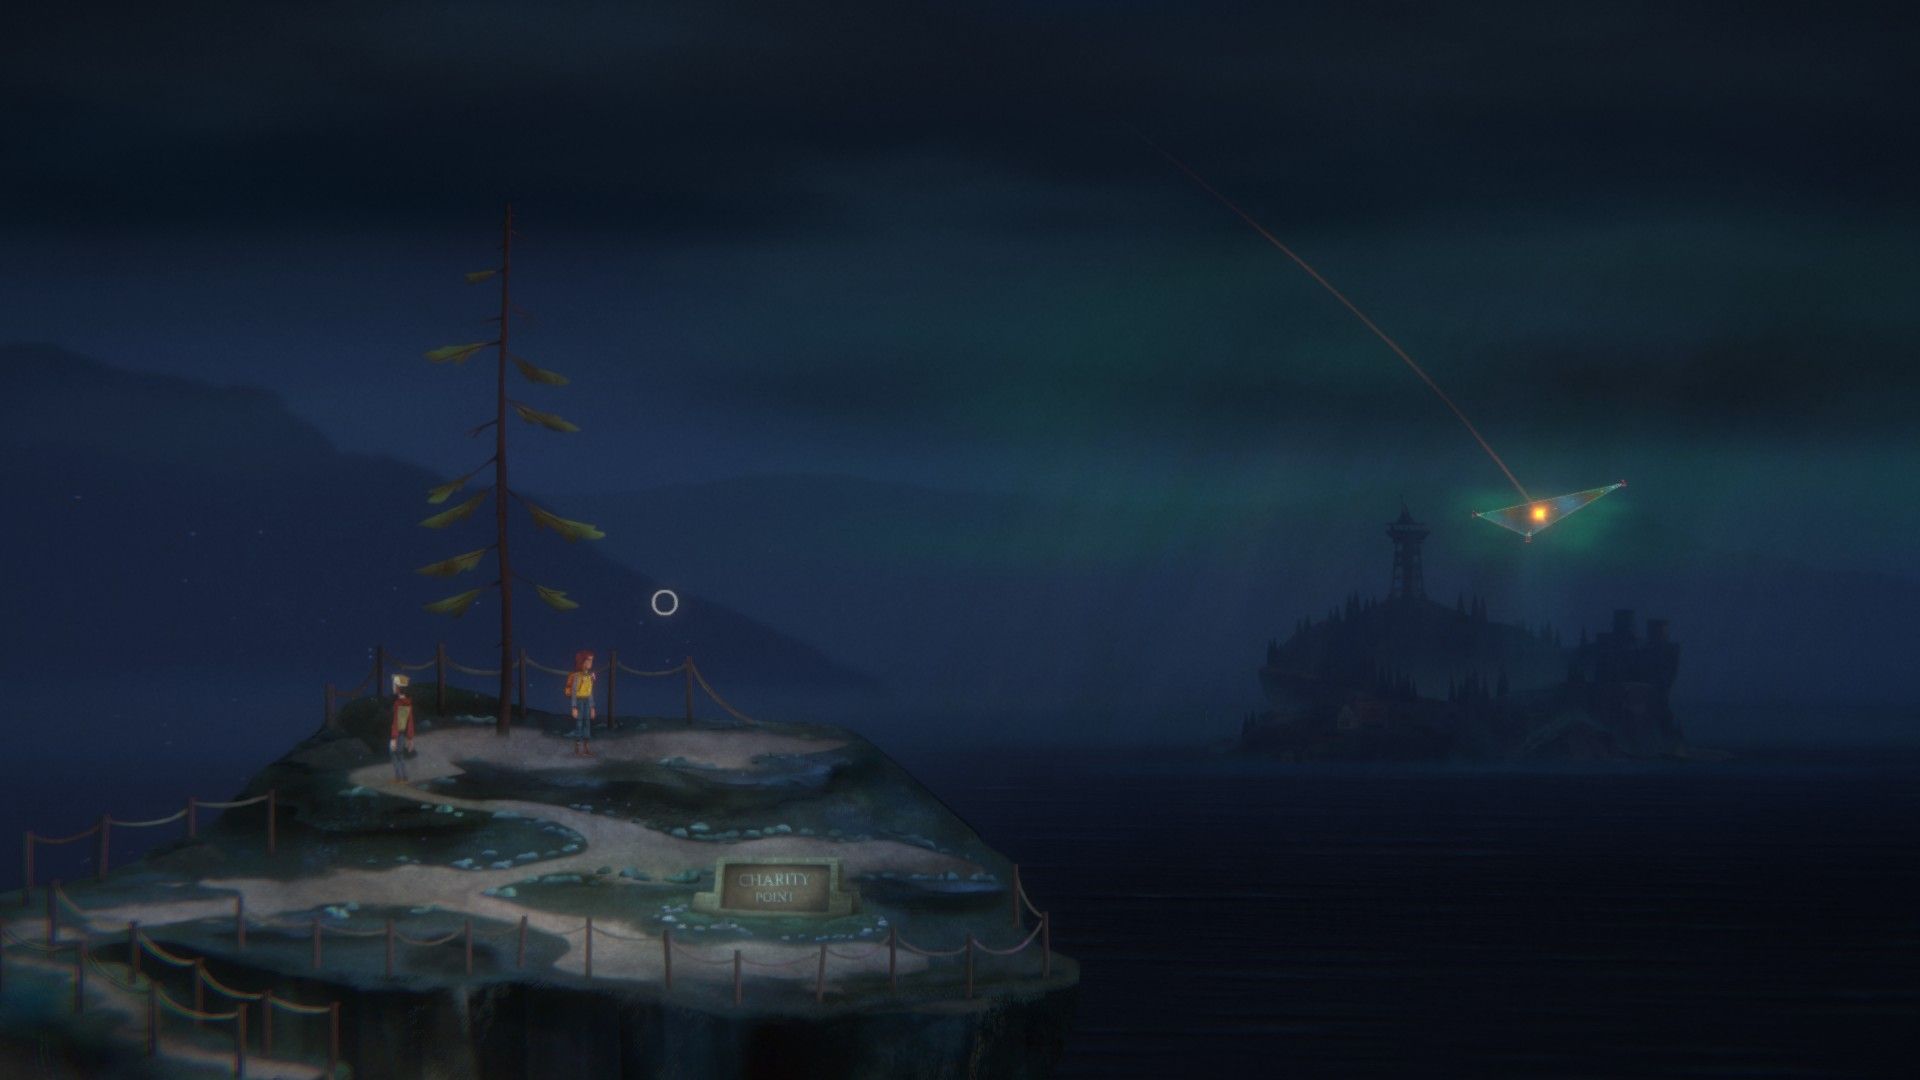 Oxenfree 2 Charity Point